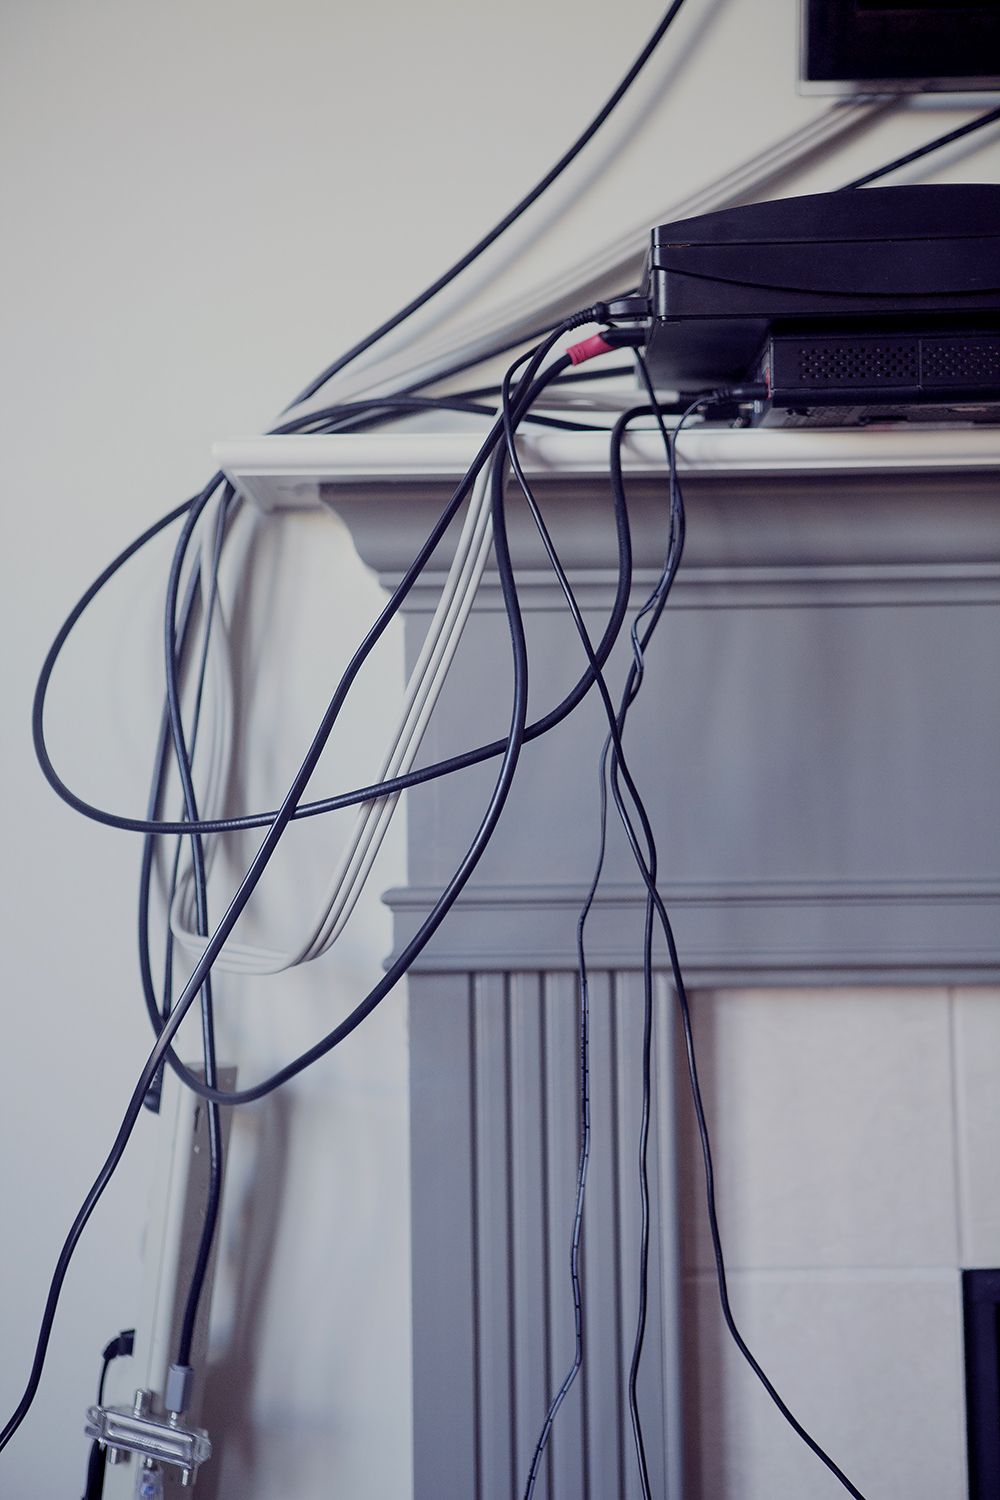 In-Wall Vertical Wire Concealment - Hiding TV Cables